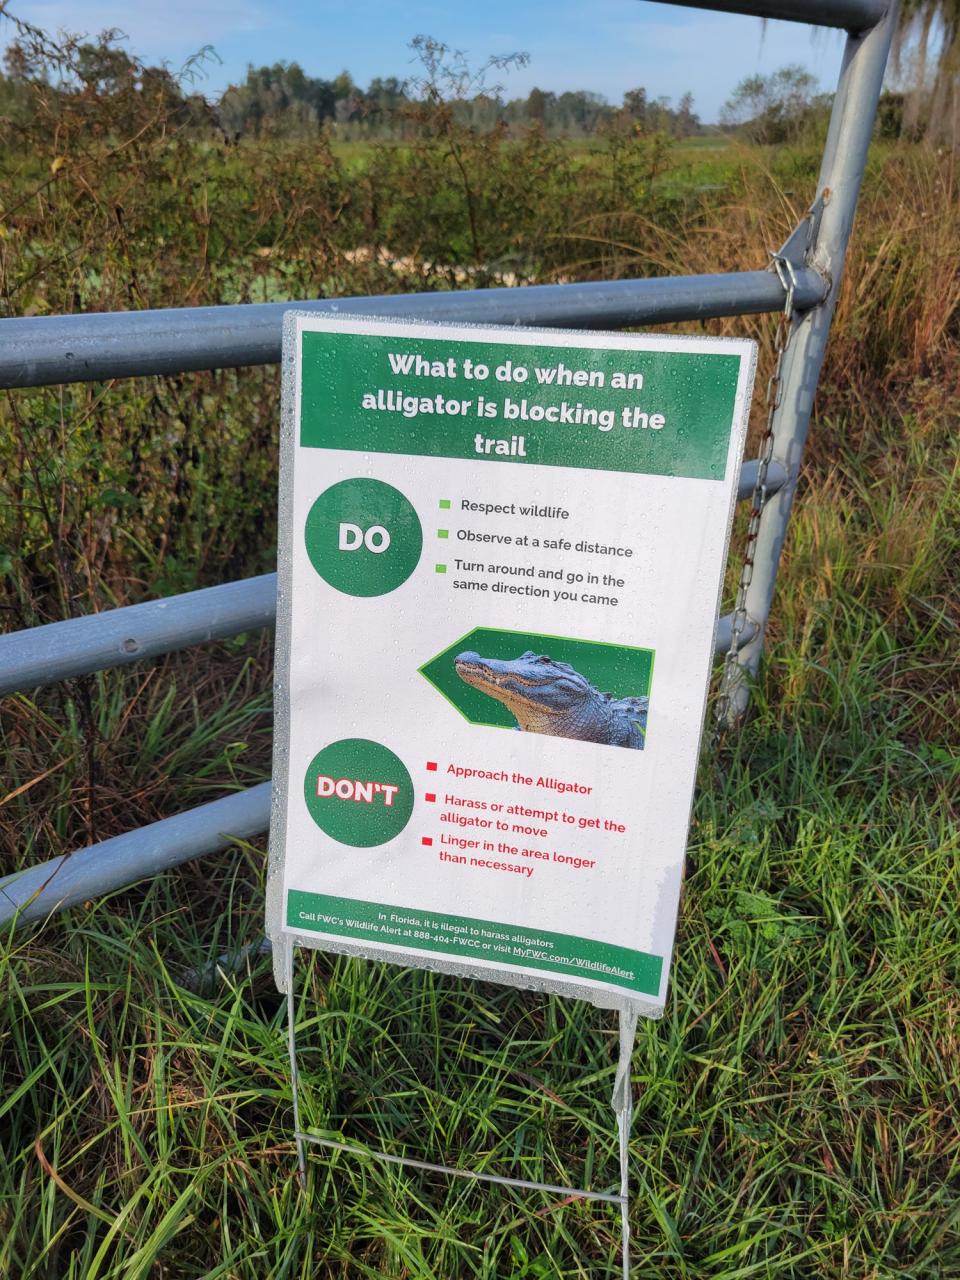 A sign posted along a trail at Circle B Bar Reserve provides guidance on proper behavior when encountering an alligator on a trail. Managers recently closed a section of Alligator Alley because of increased alligator crossings.